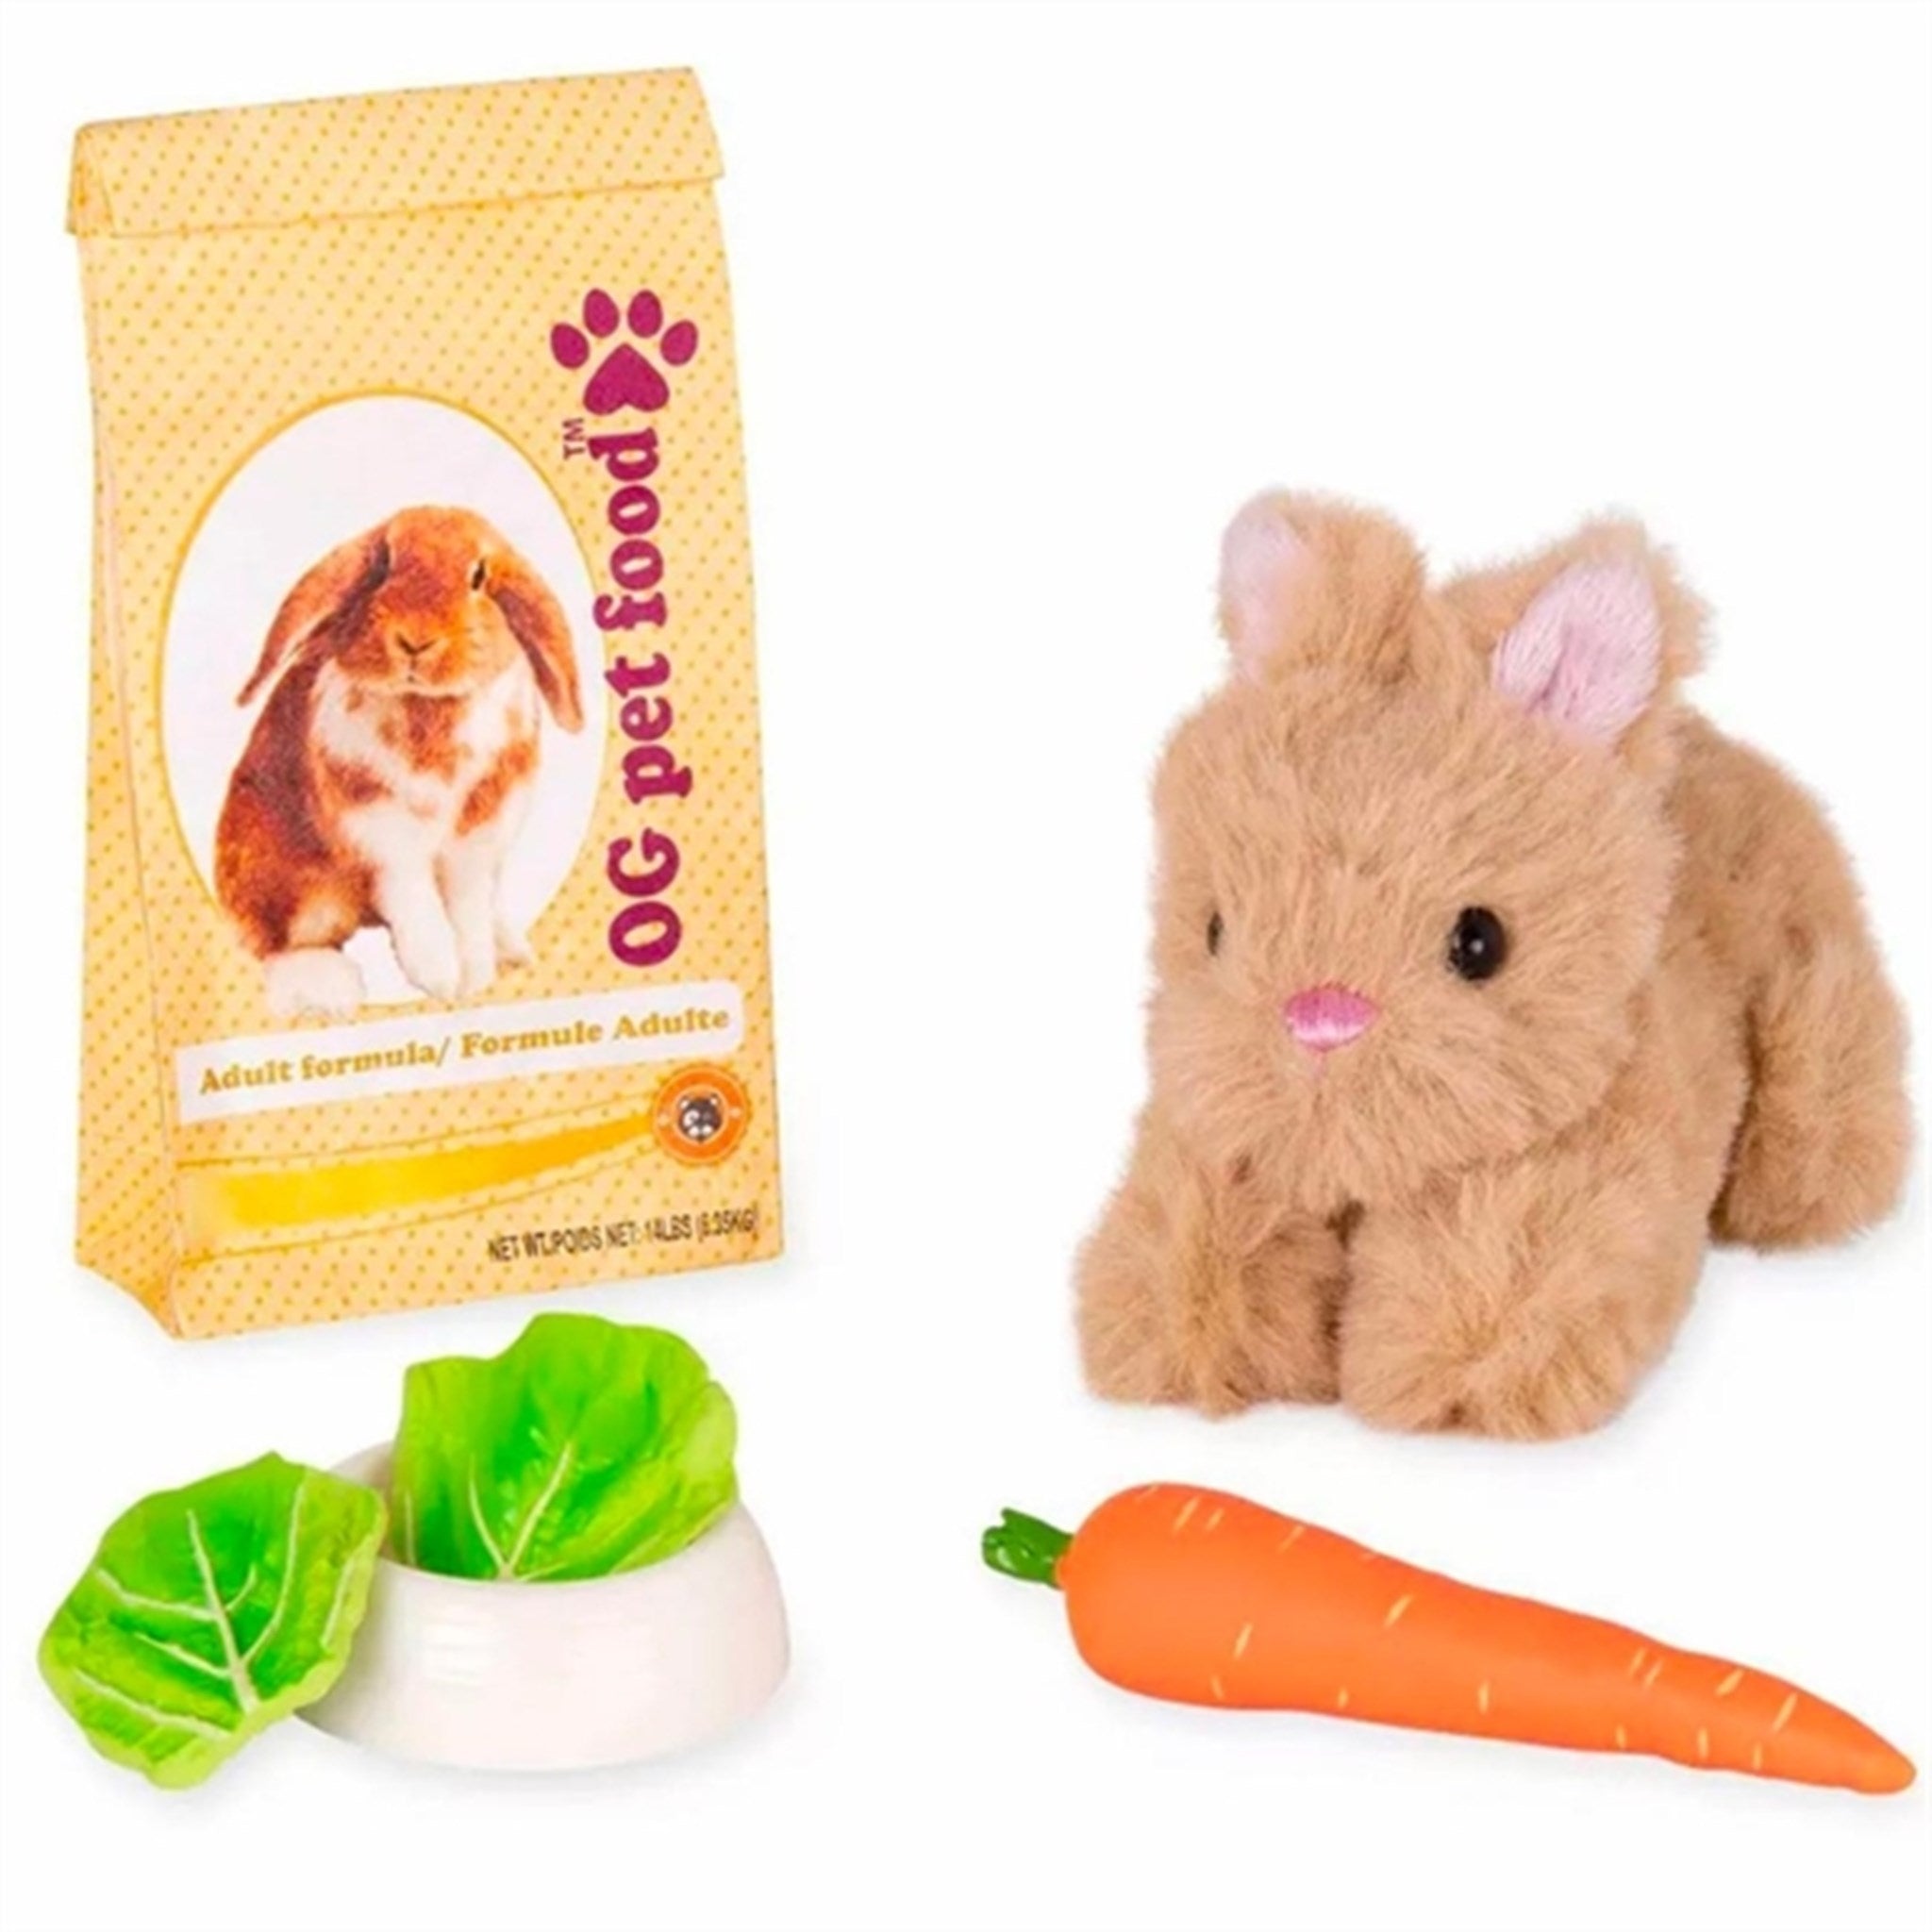 Our Generation Doll Accessories - Pet Kanin